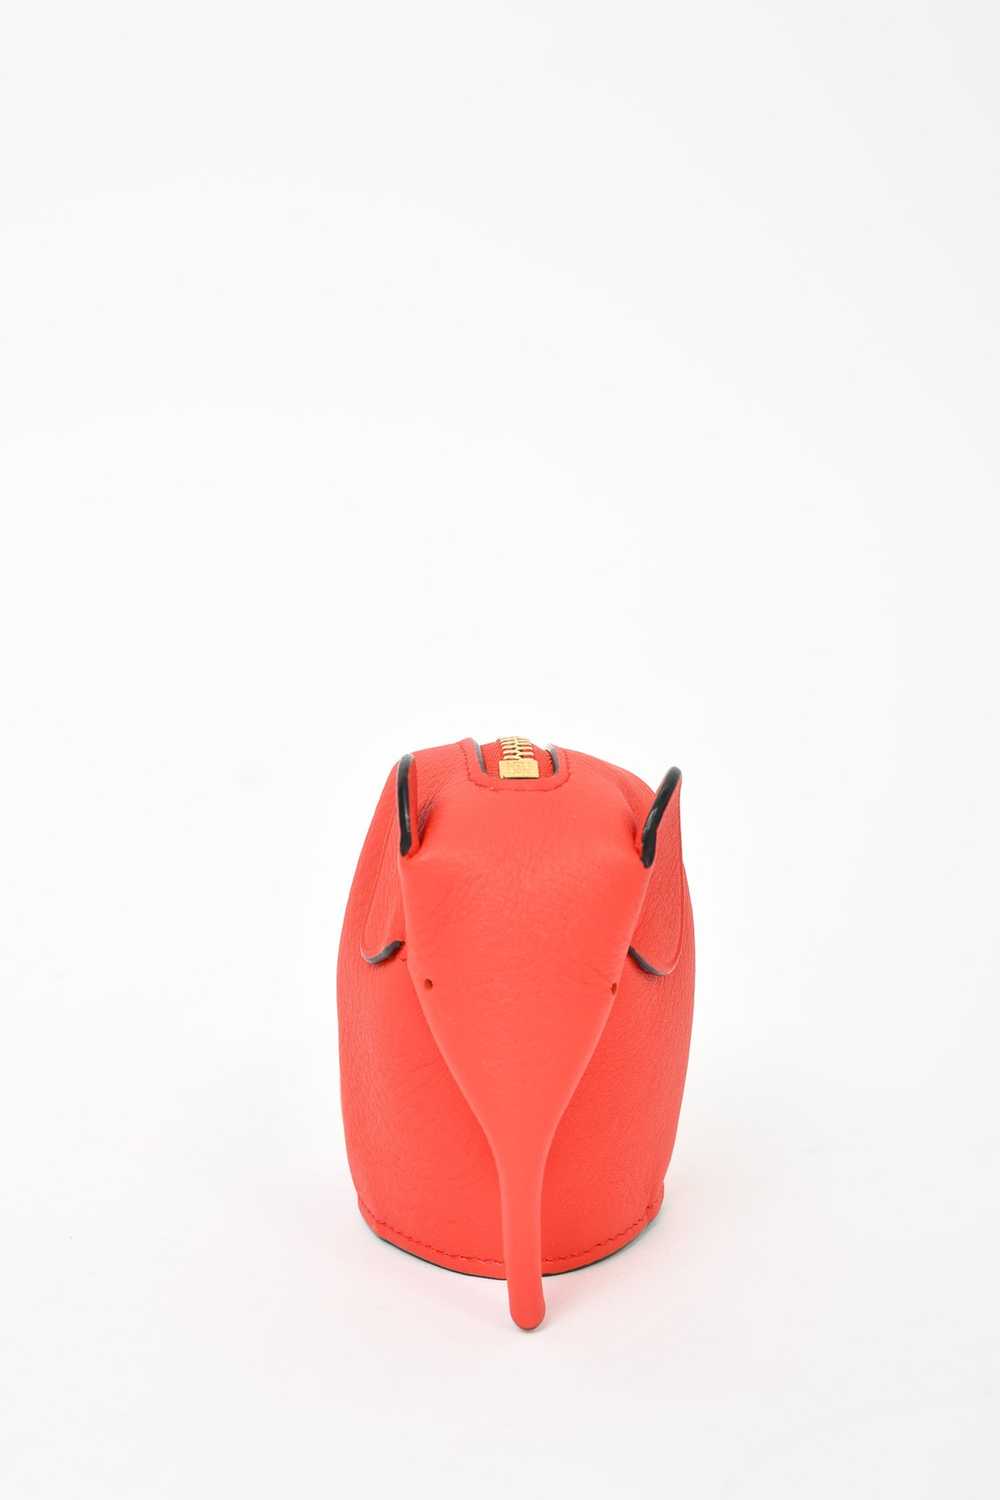 Loewe Red Leather Elephant Coin Purse - image 3